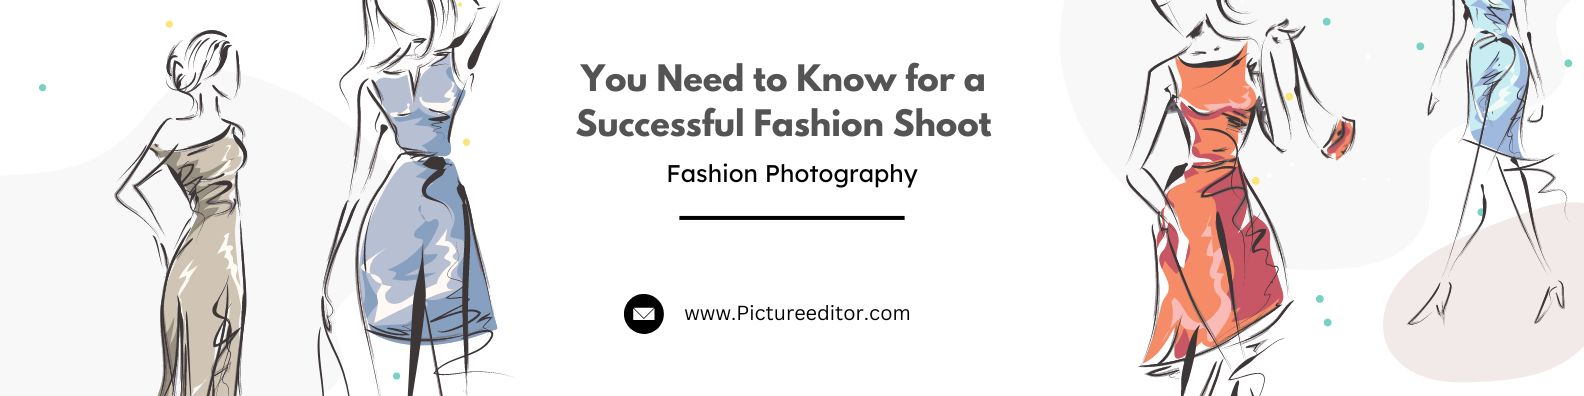 You Need to Know for a Successful Fashion Shoot